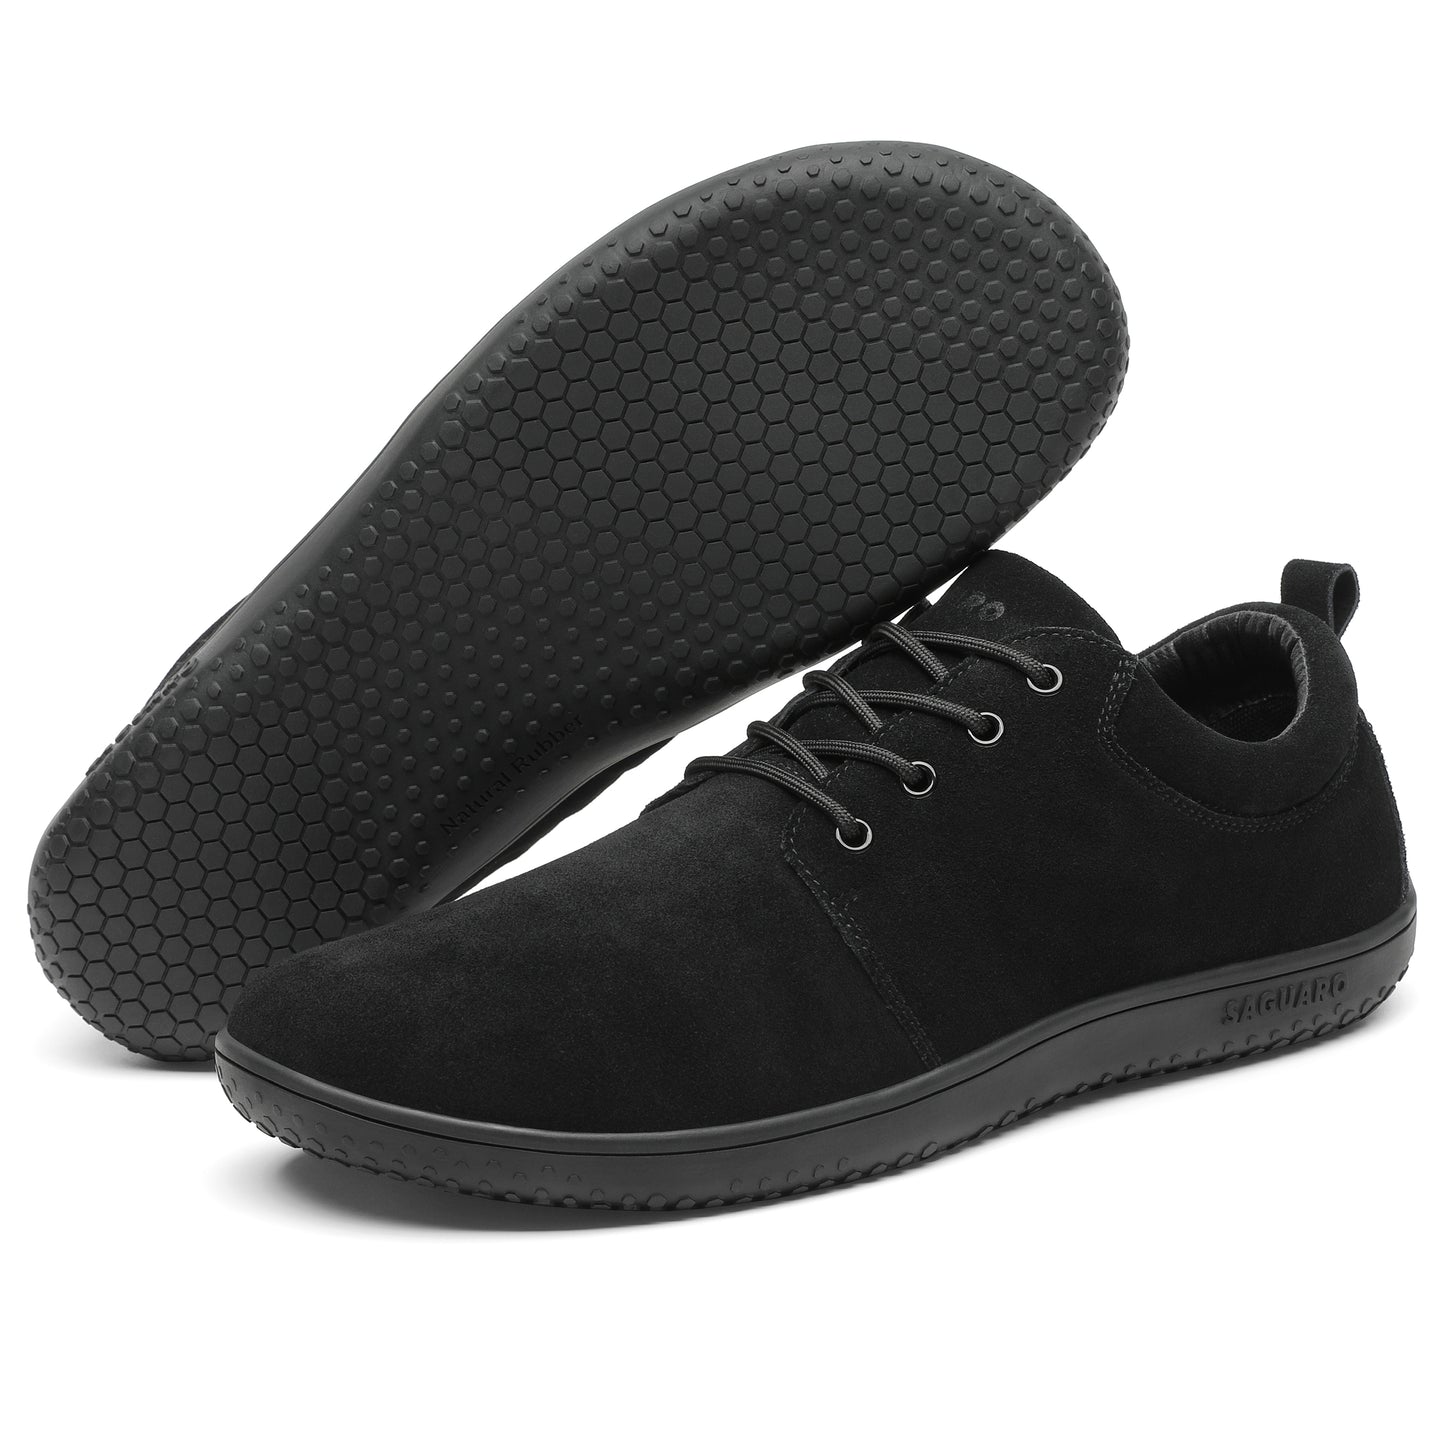 Dream I - Negro - Business Casual Barefootshoes no